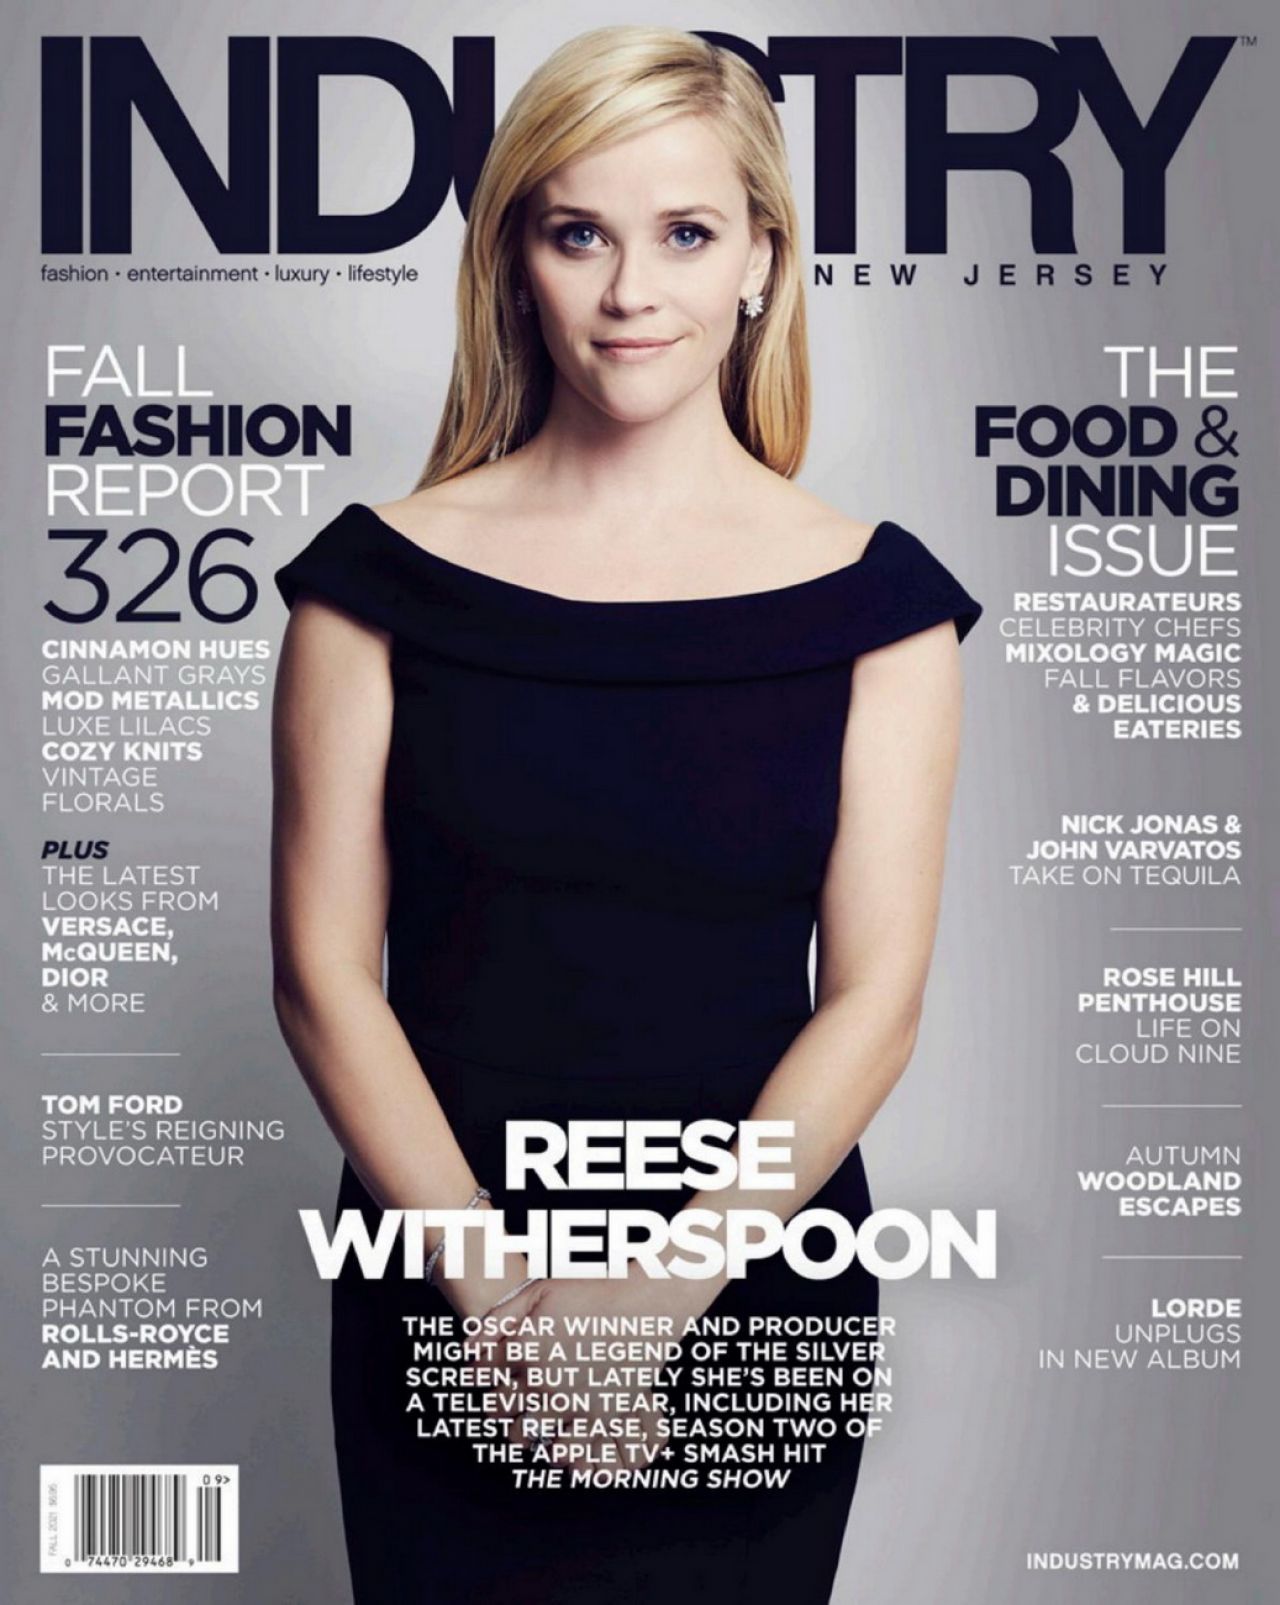 Reese Witherspoon - Industry New Jersey September/October 2021 Issue ...